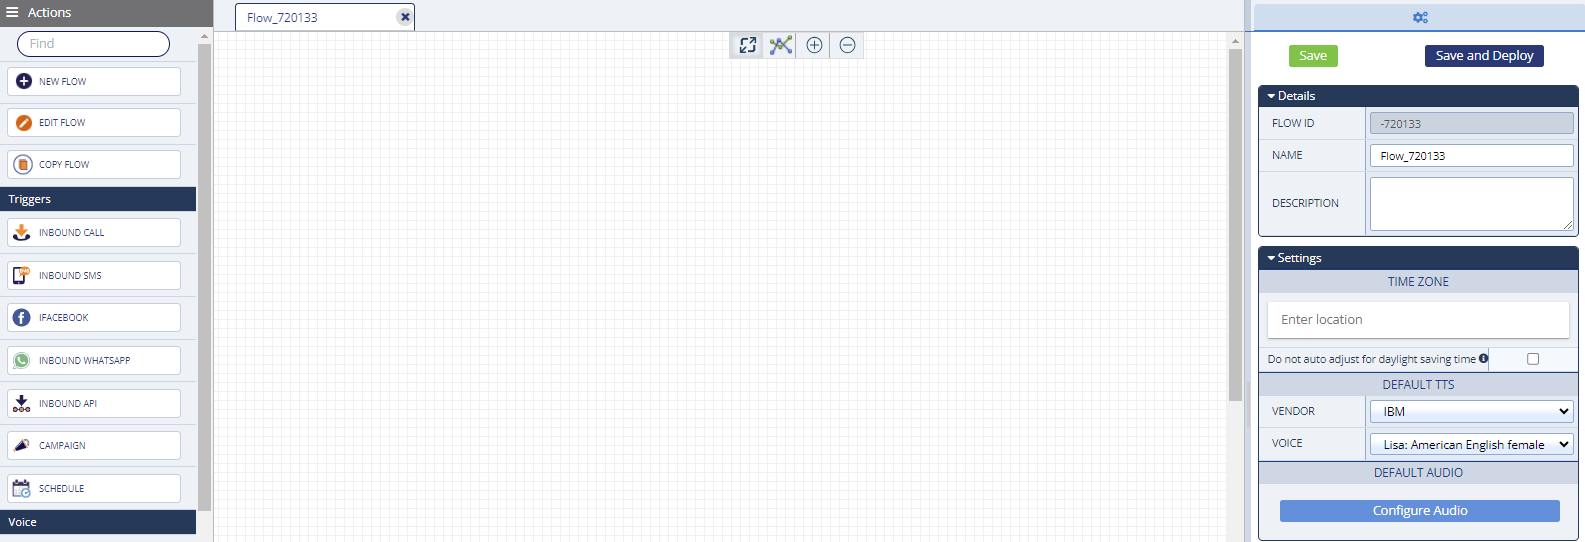 The Flow Editor is show with a blank board in the middle